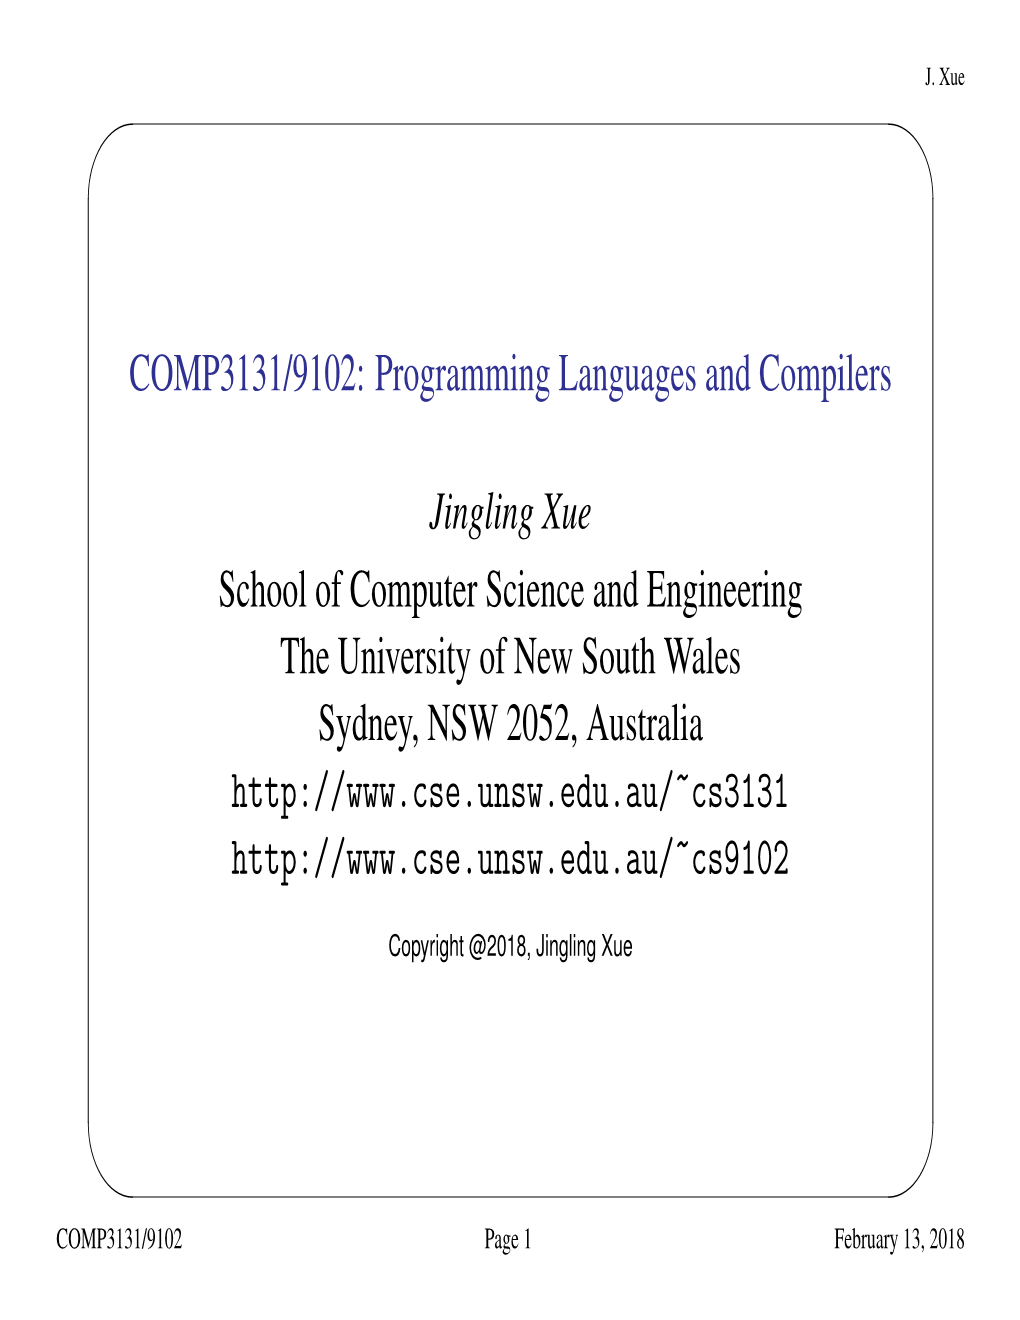 COMP3131/9102: Programming Languages and Compilers Jingling